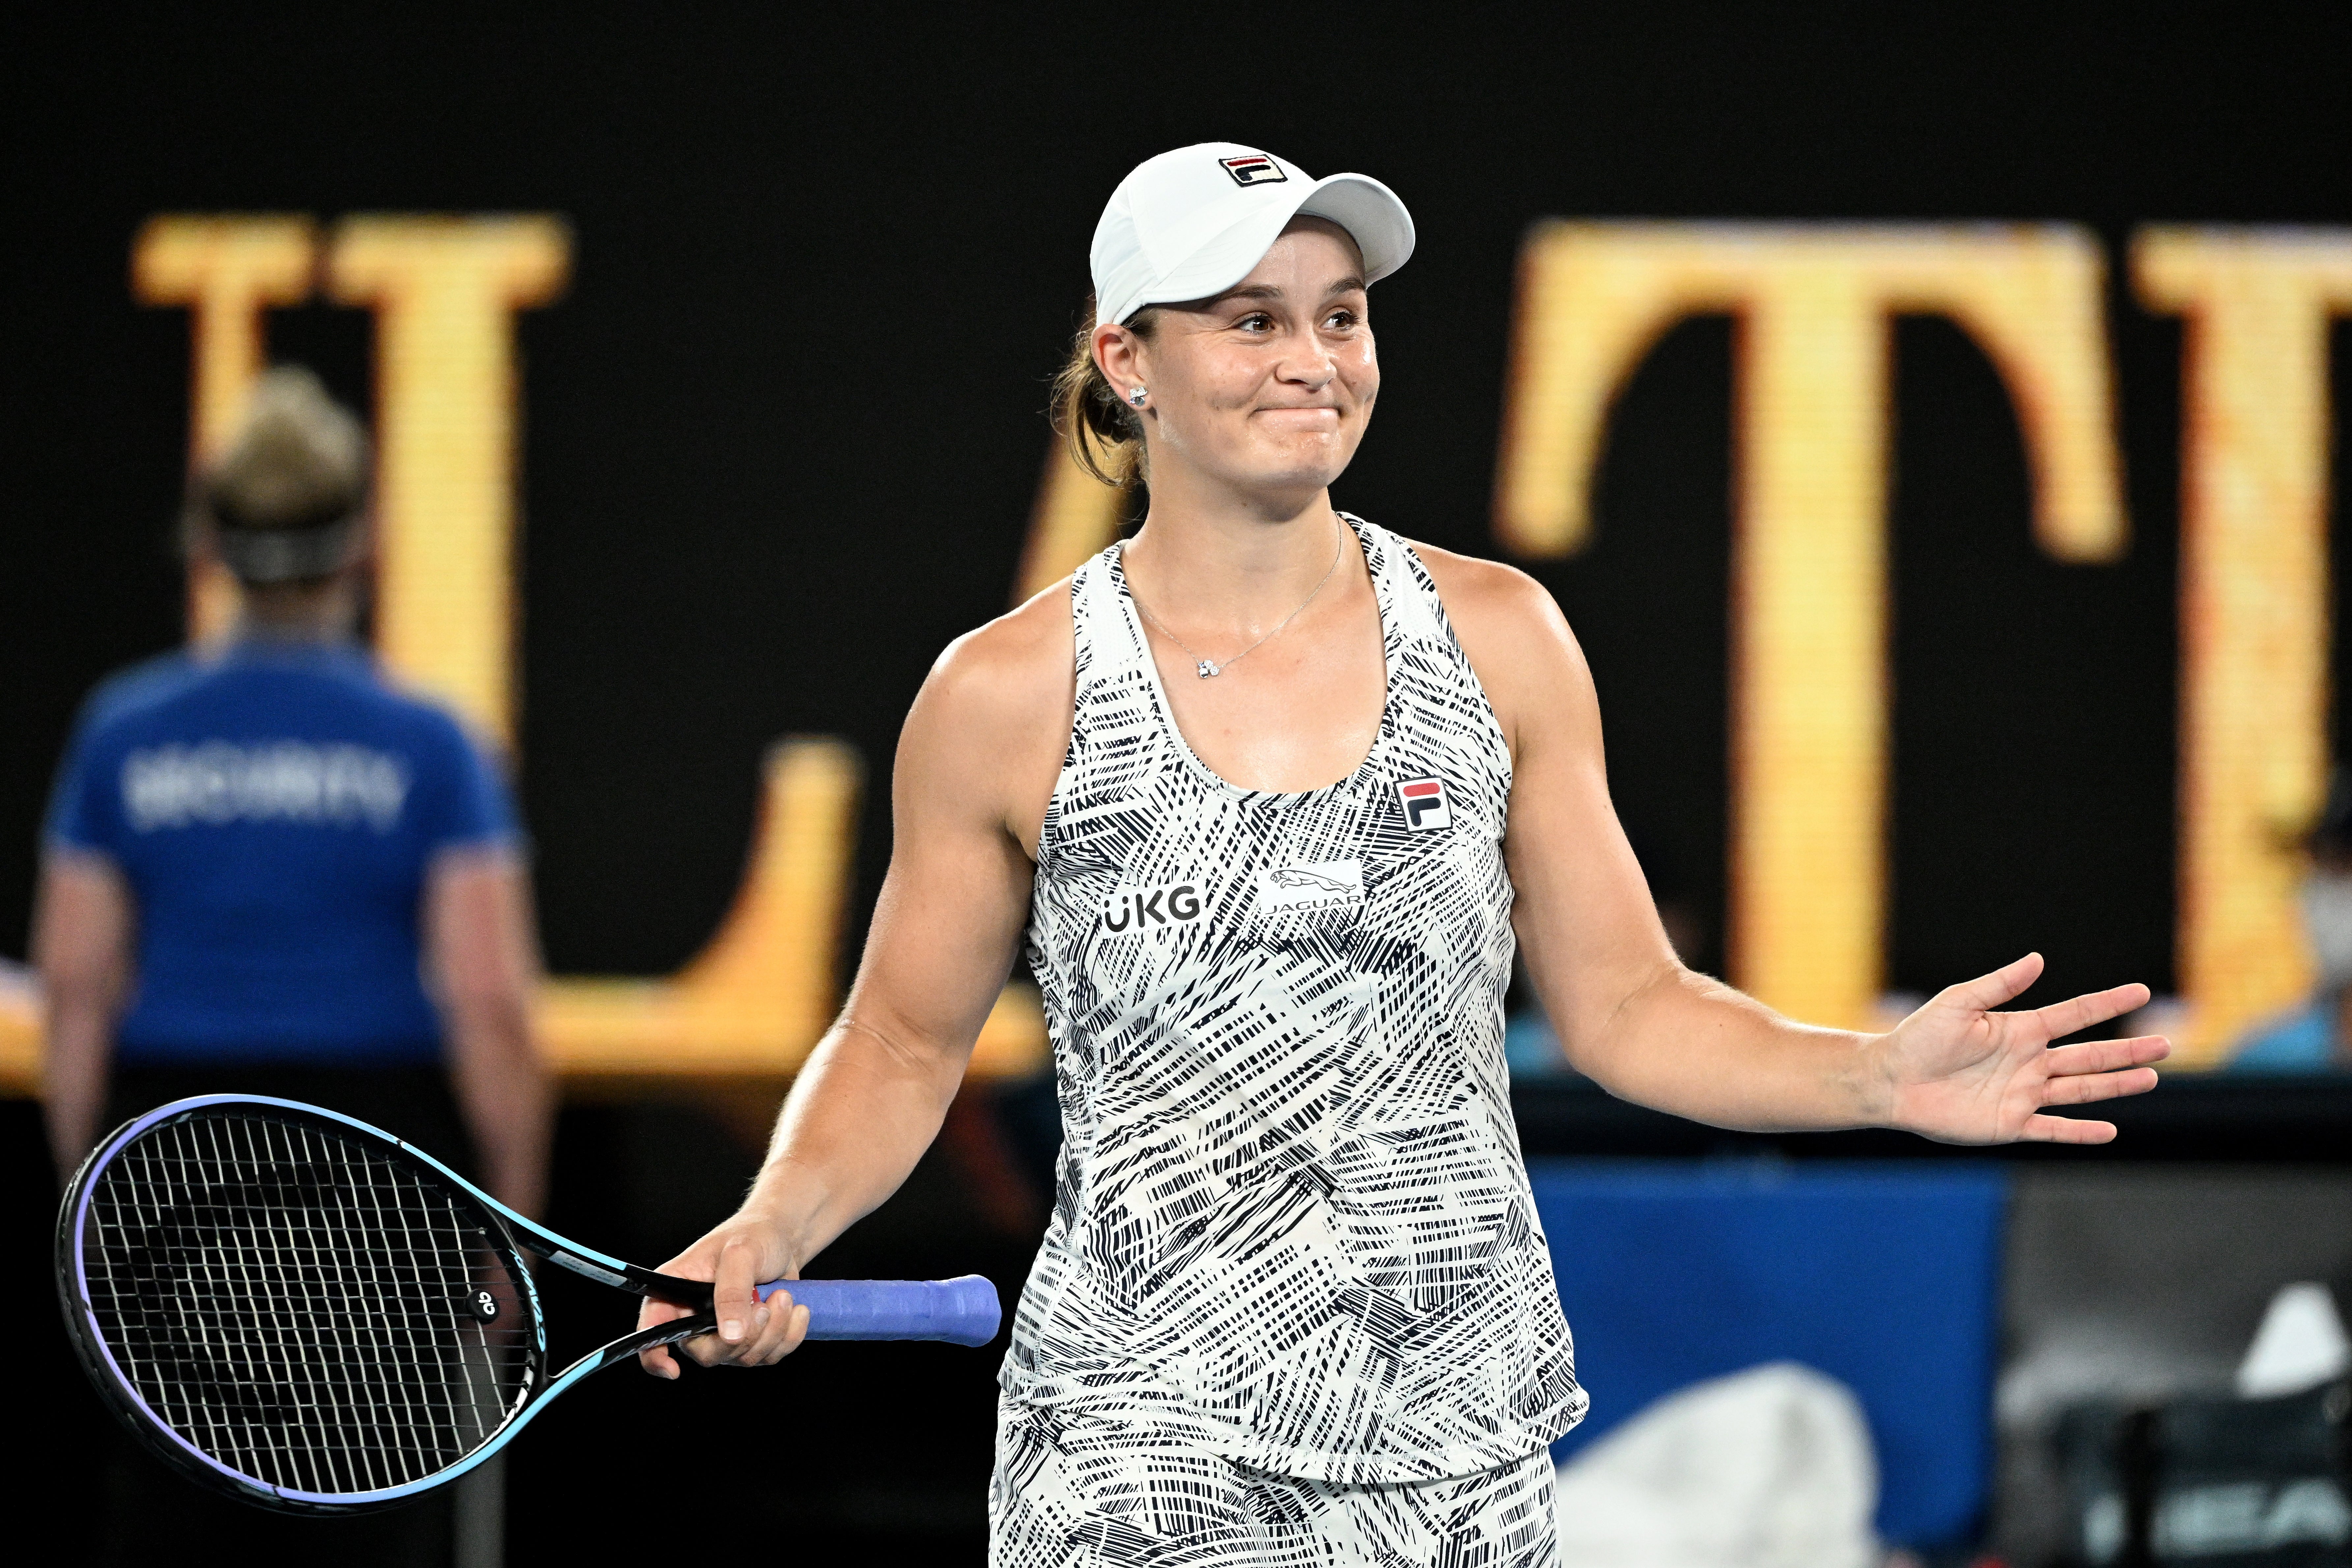 Barty will take on American Danielle Collins on Saturday